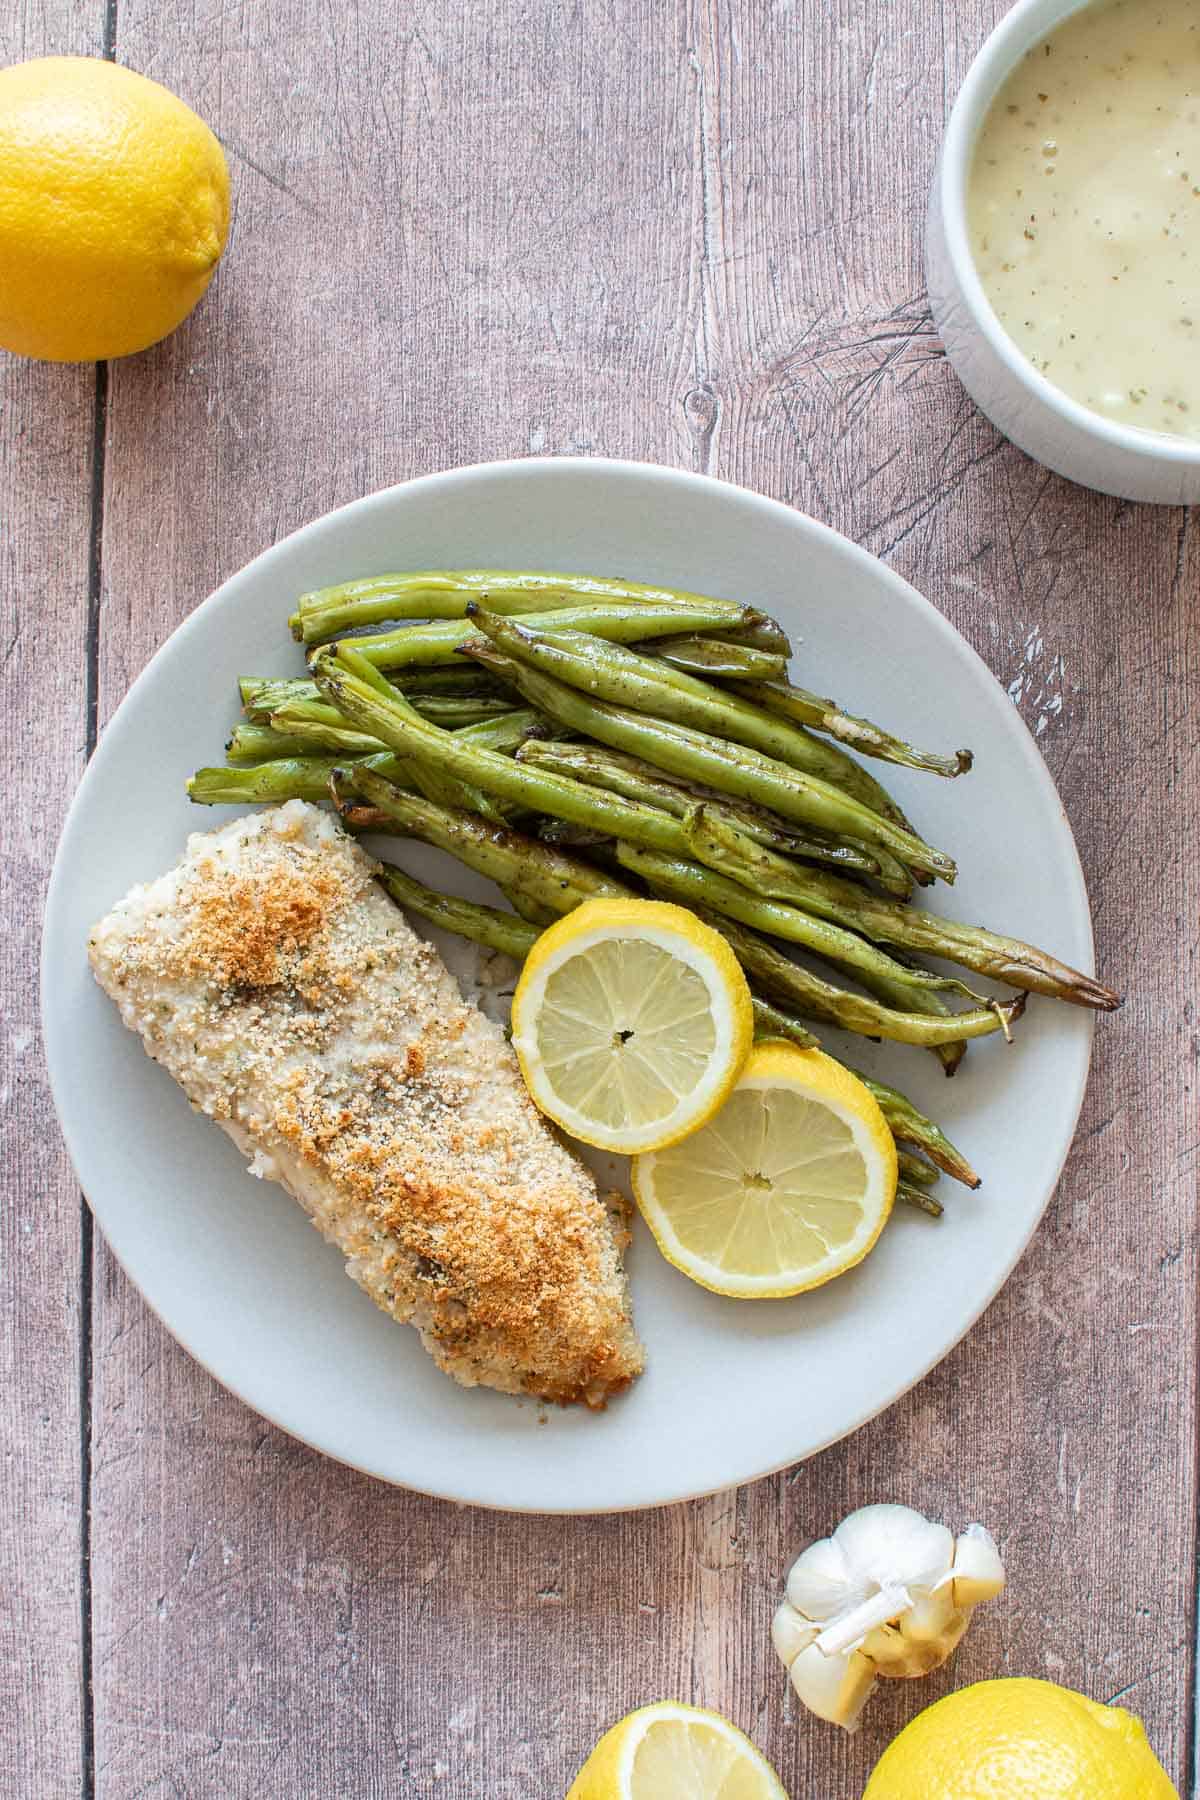 A dinner plate with haddock, green beans and lemon.